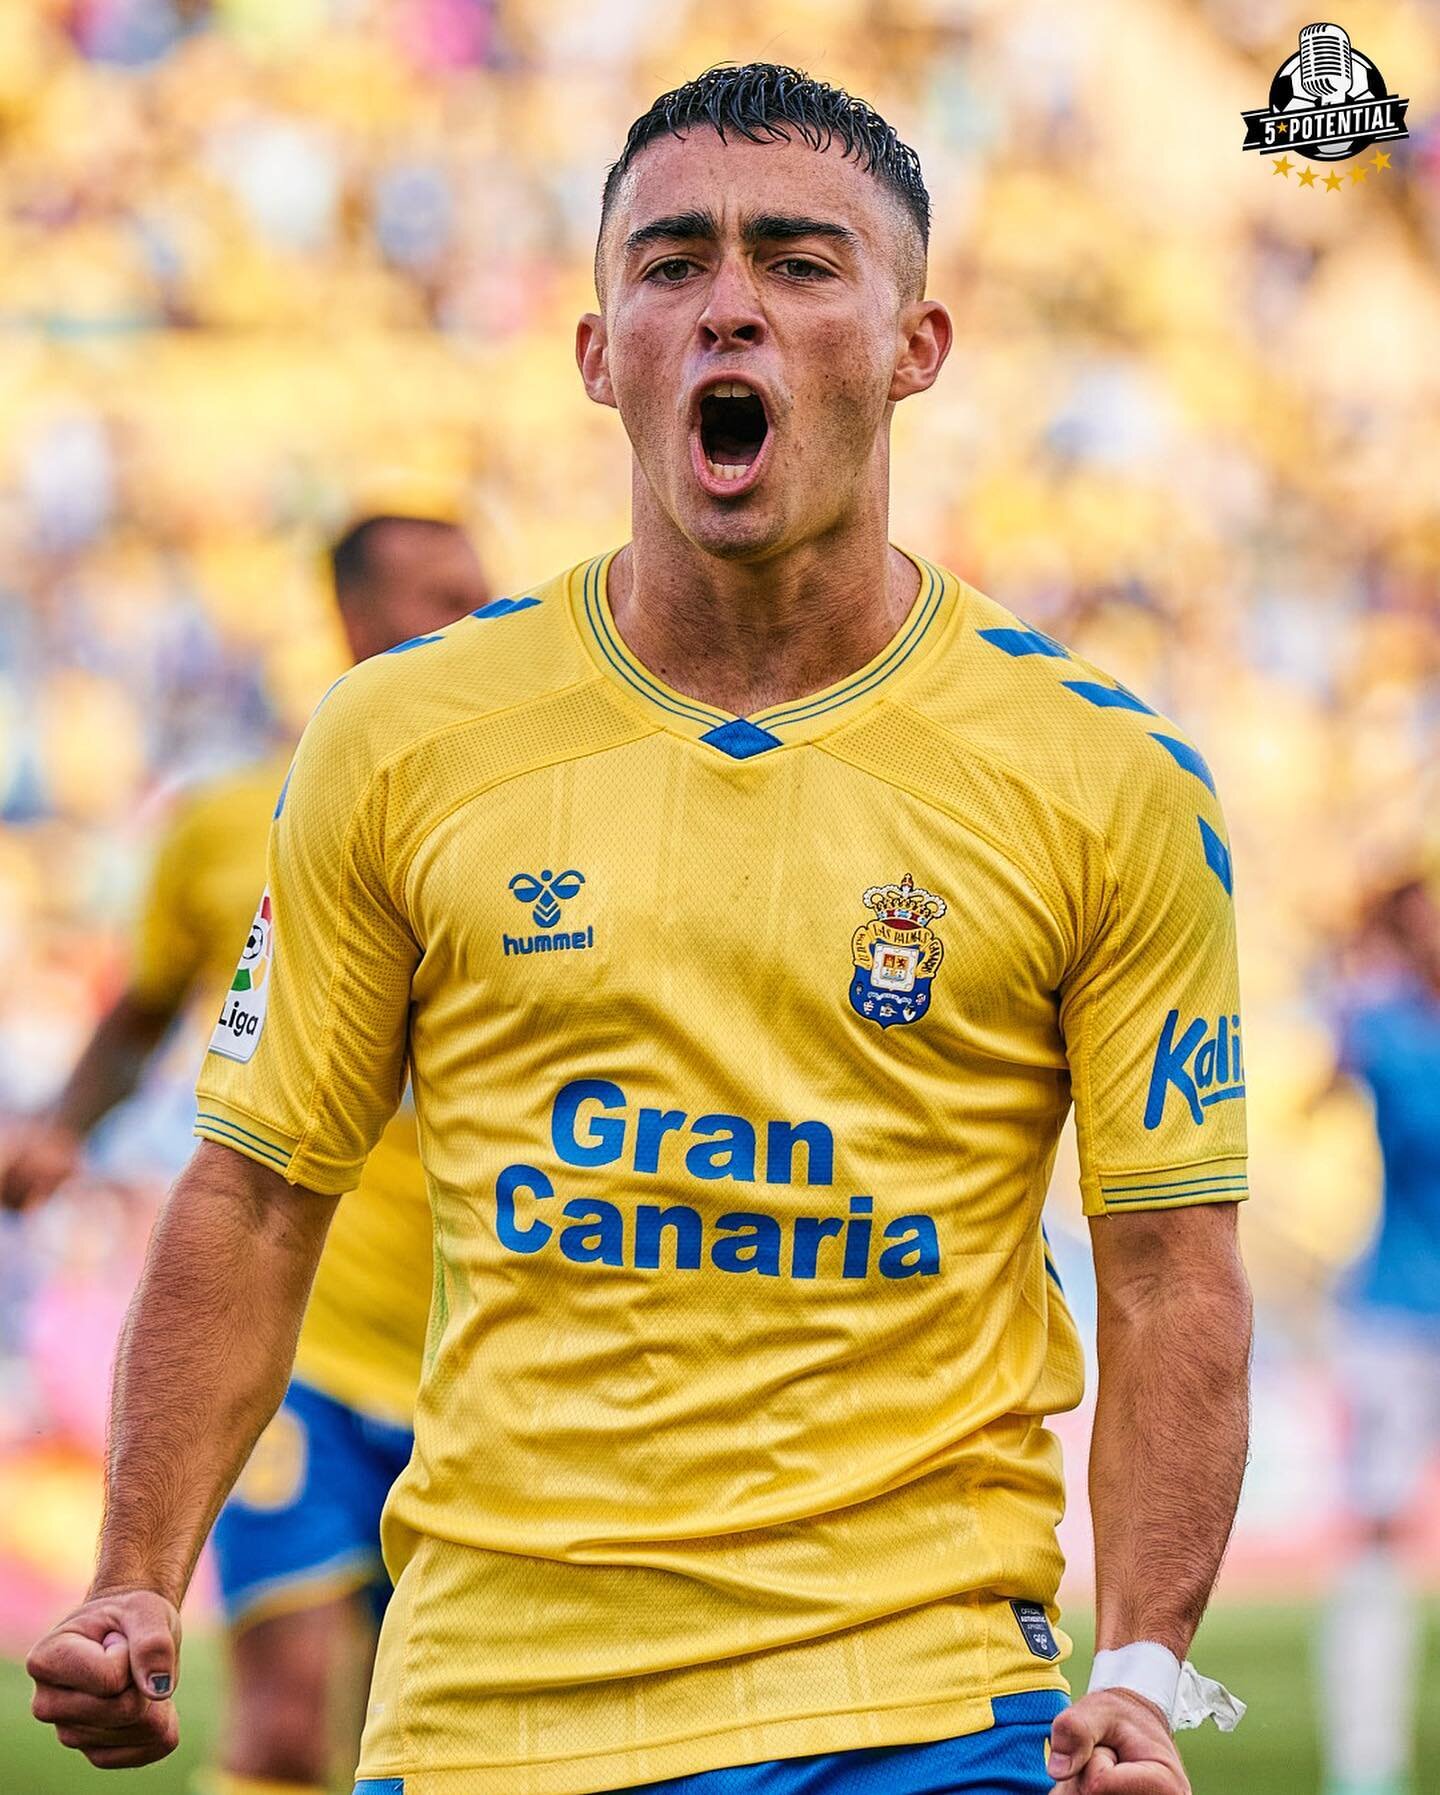 𝗡𝗘𝗪: 𝗪𝗼𝗻𝗱𝗲𝗿𝗸𝗶𝗱 𝗪𝗮𝘁𝗰𝗵 🔍 

This week&rsquo;s Wonderkid Watch takes a look at a player &lsquo;dubbed the new Pedri&rsquo; - link is in the bio, go check him out. 

#FM23 #FootballManager #Podcast